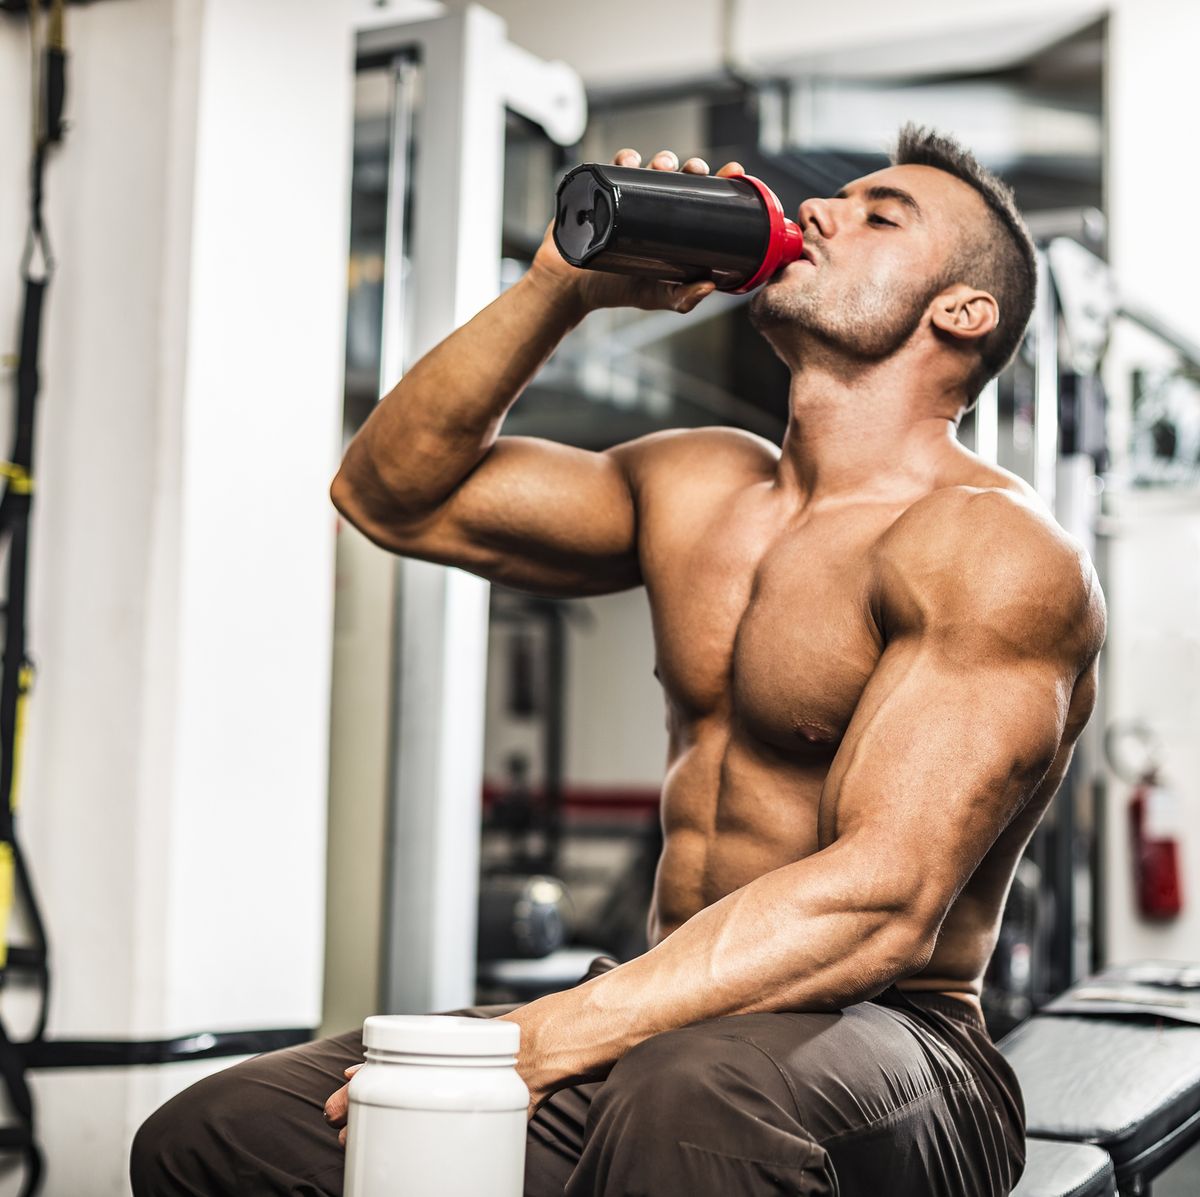 How To Increase Protein Intake for Muscle Growth + The Best High